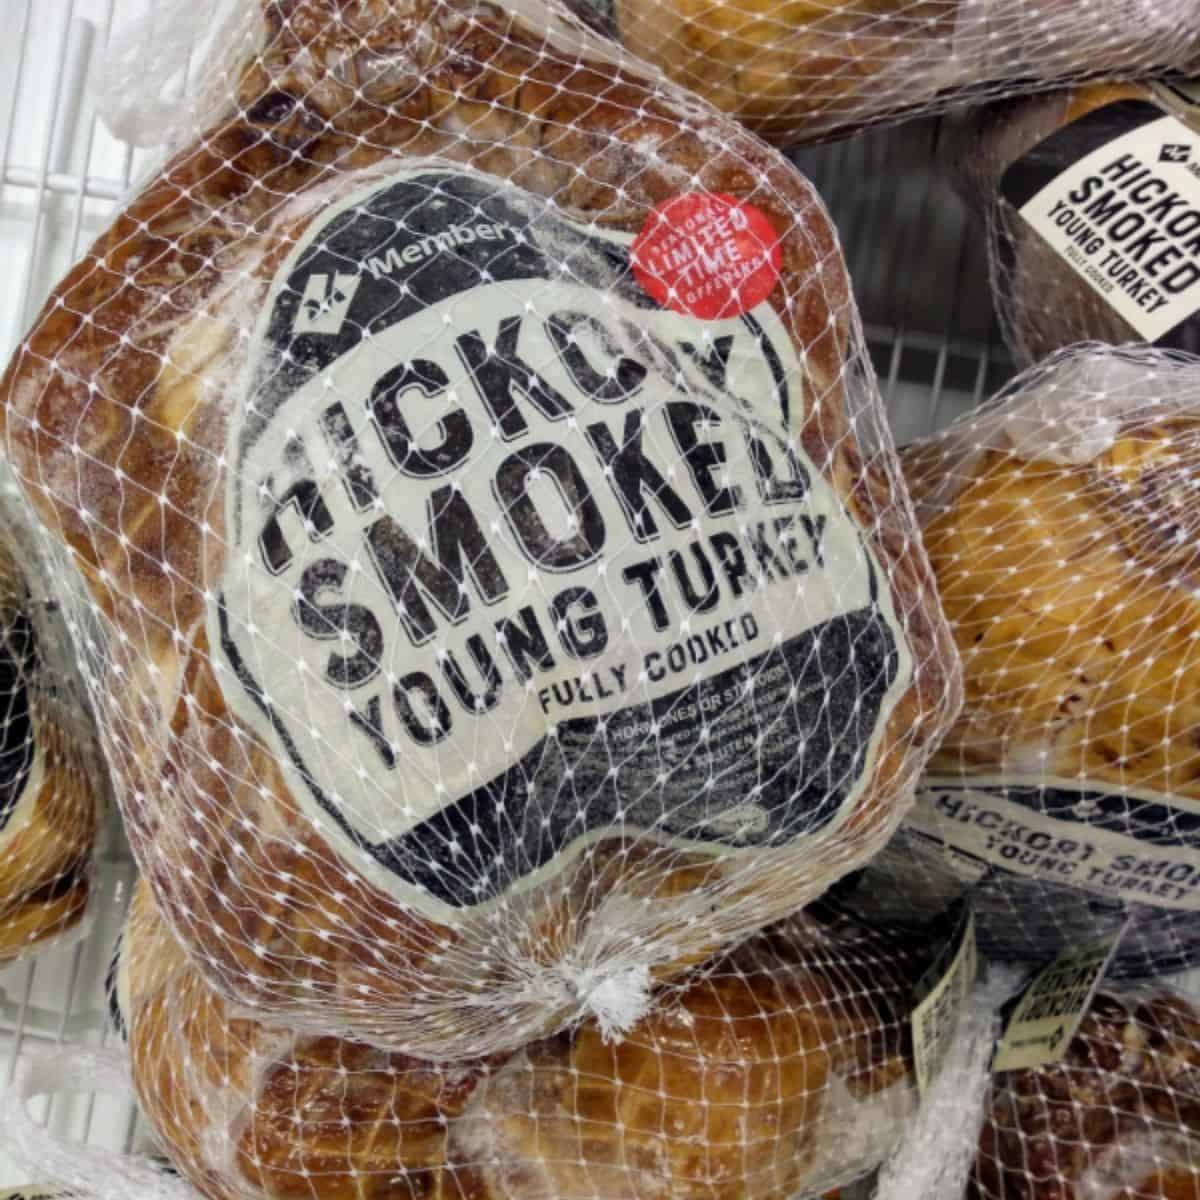 A display of Member's Mark Hickory Smoked Young Turkey in brown packaging with white netting over top.